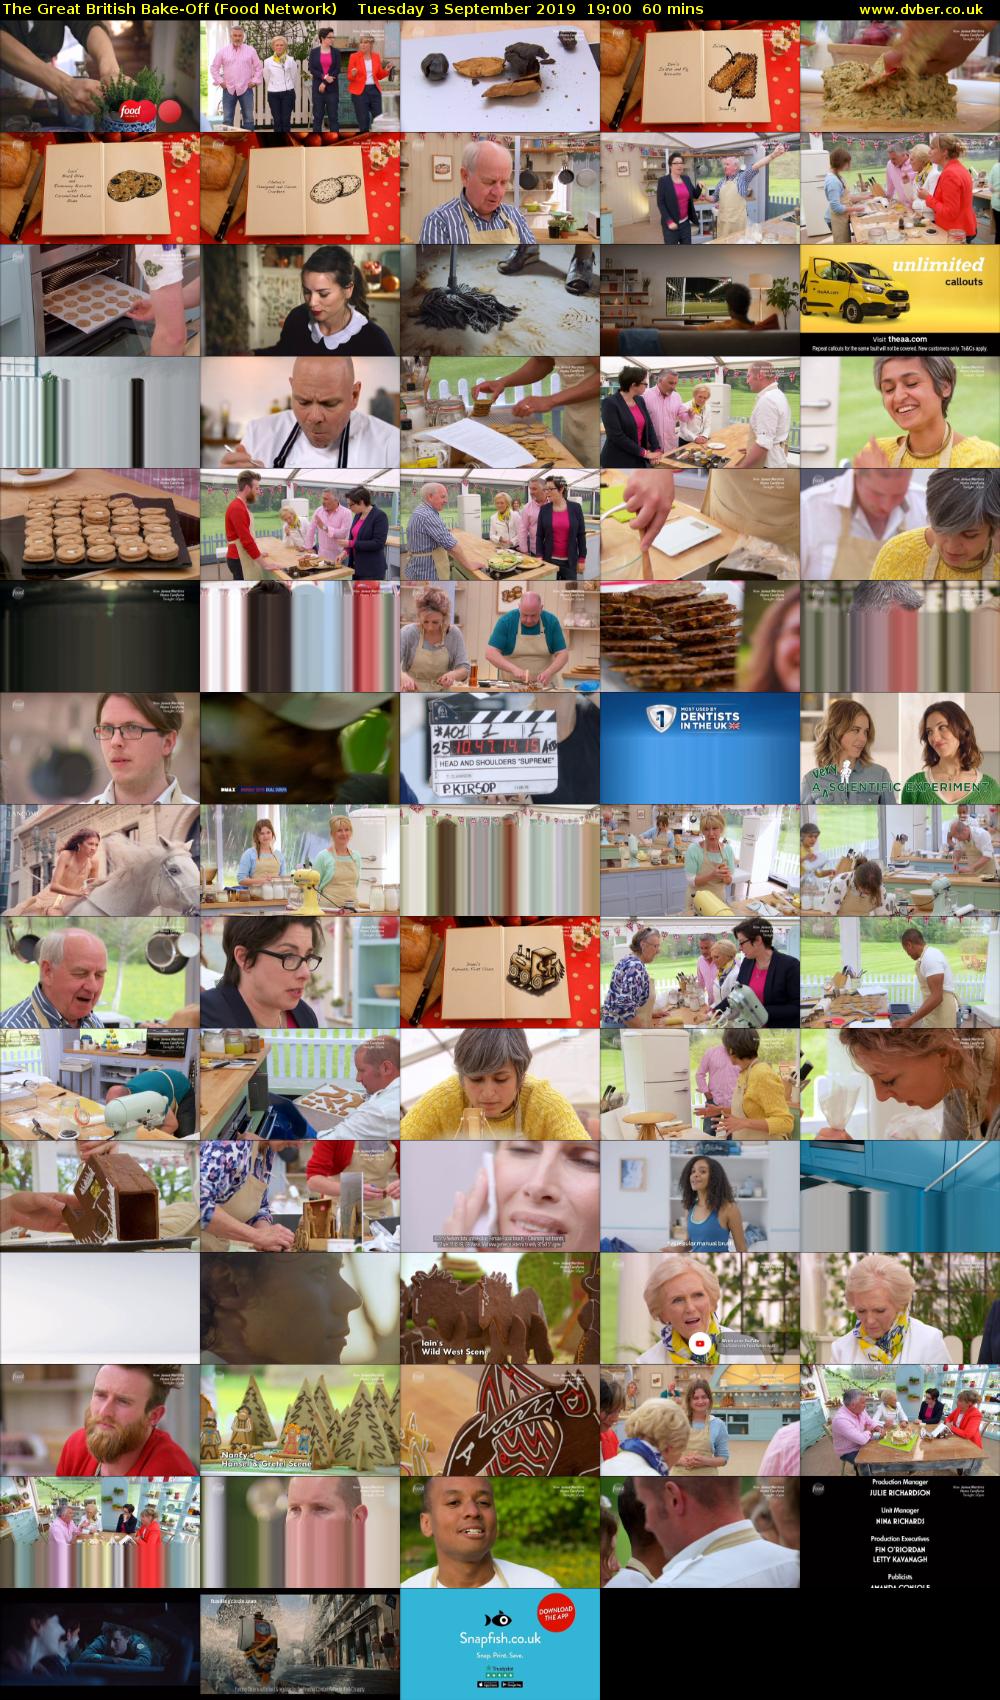 The Great British Bake-Off (Food Network) Tuesday 3 September 2019 19:00 - 20:00